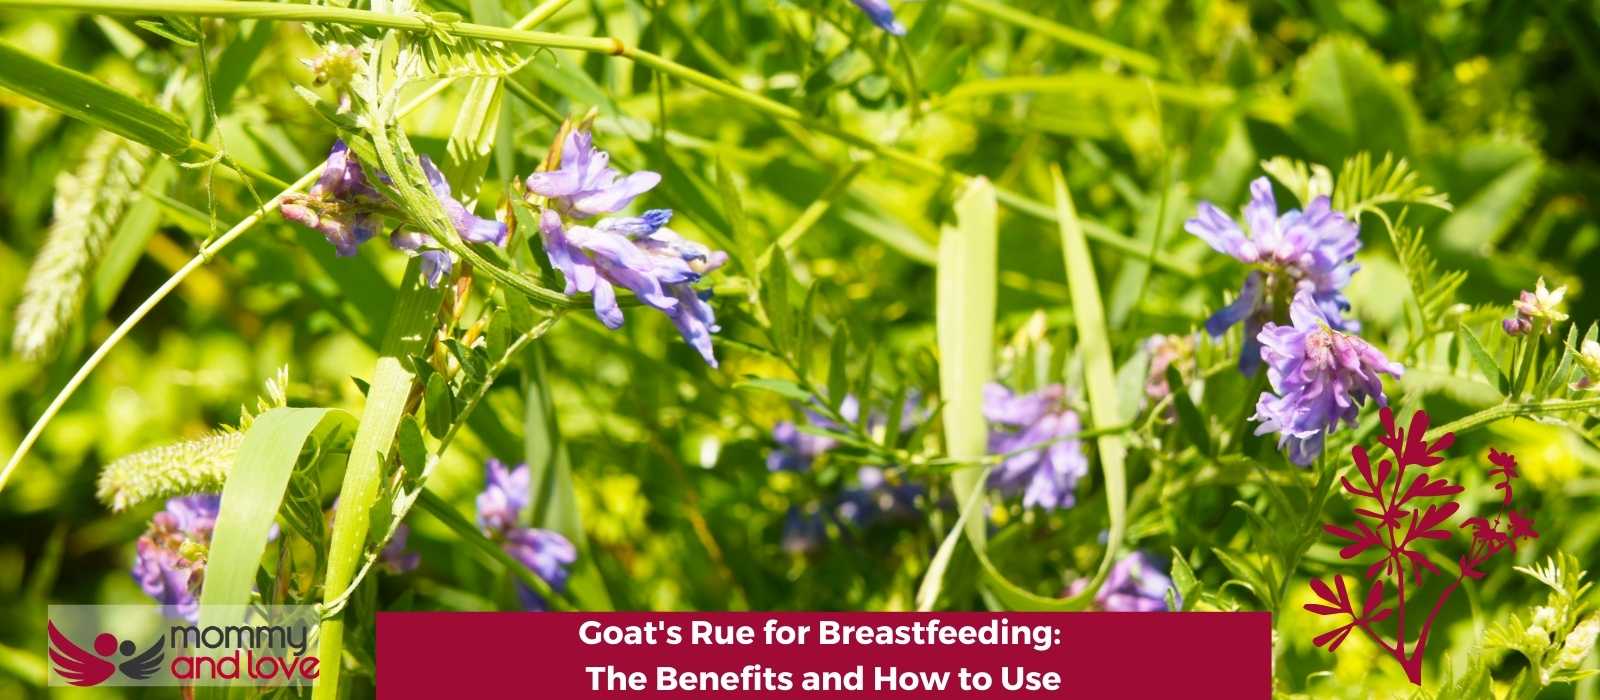 Goat's Rue for Breastfeeding: The Benefits and How to Use